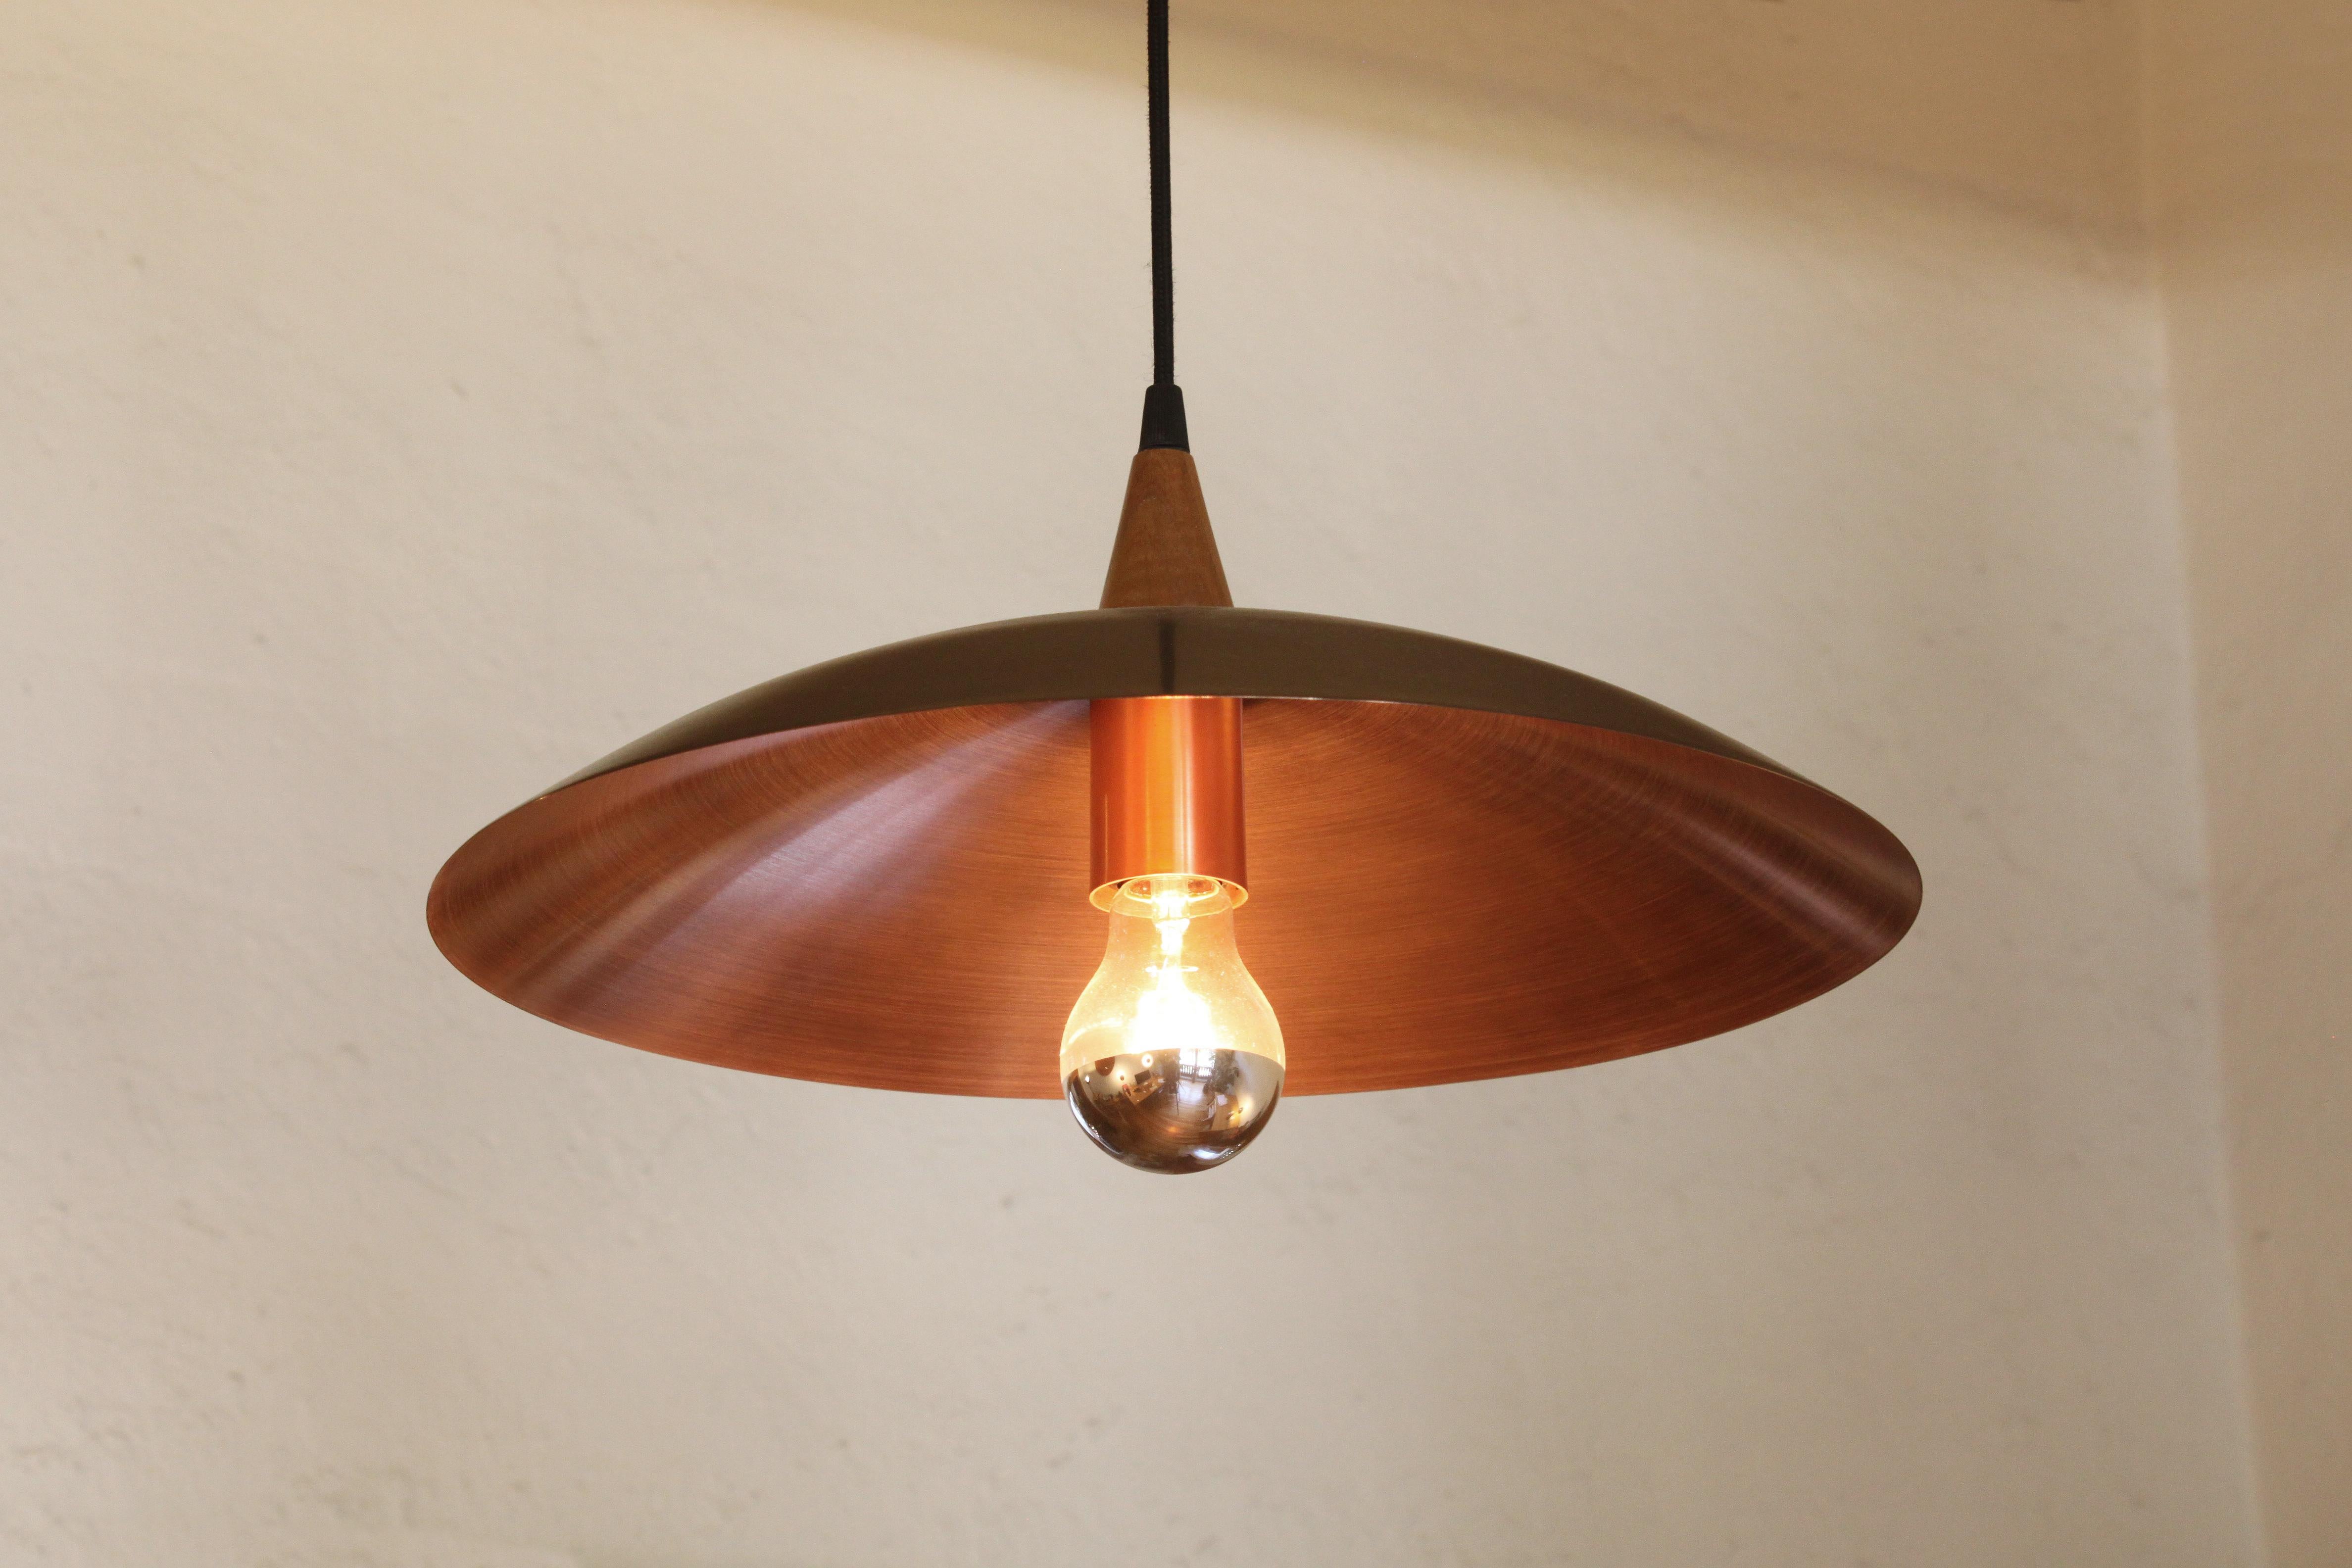 Mexican Plato Abajo 60 Pendant Lamp, Maria Beckmann, Represented by Tuleste Factory